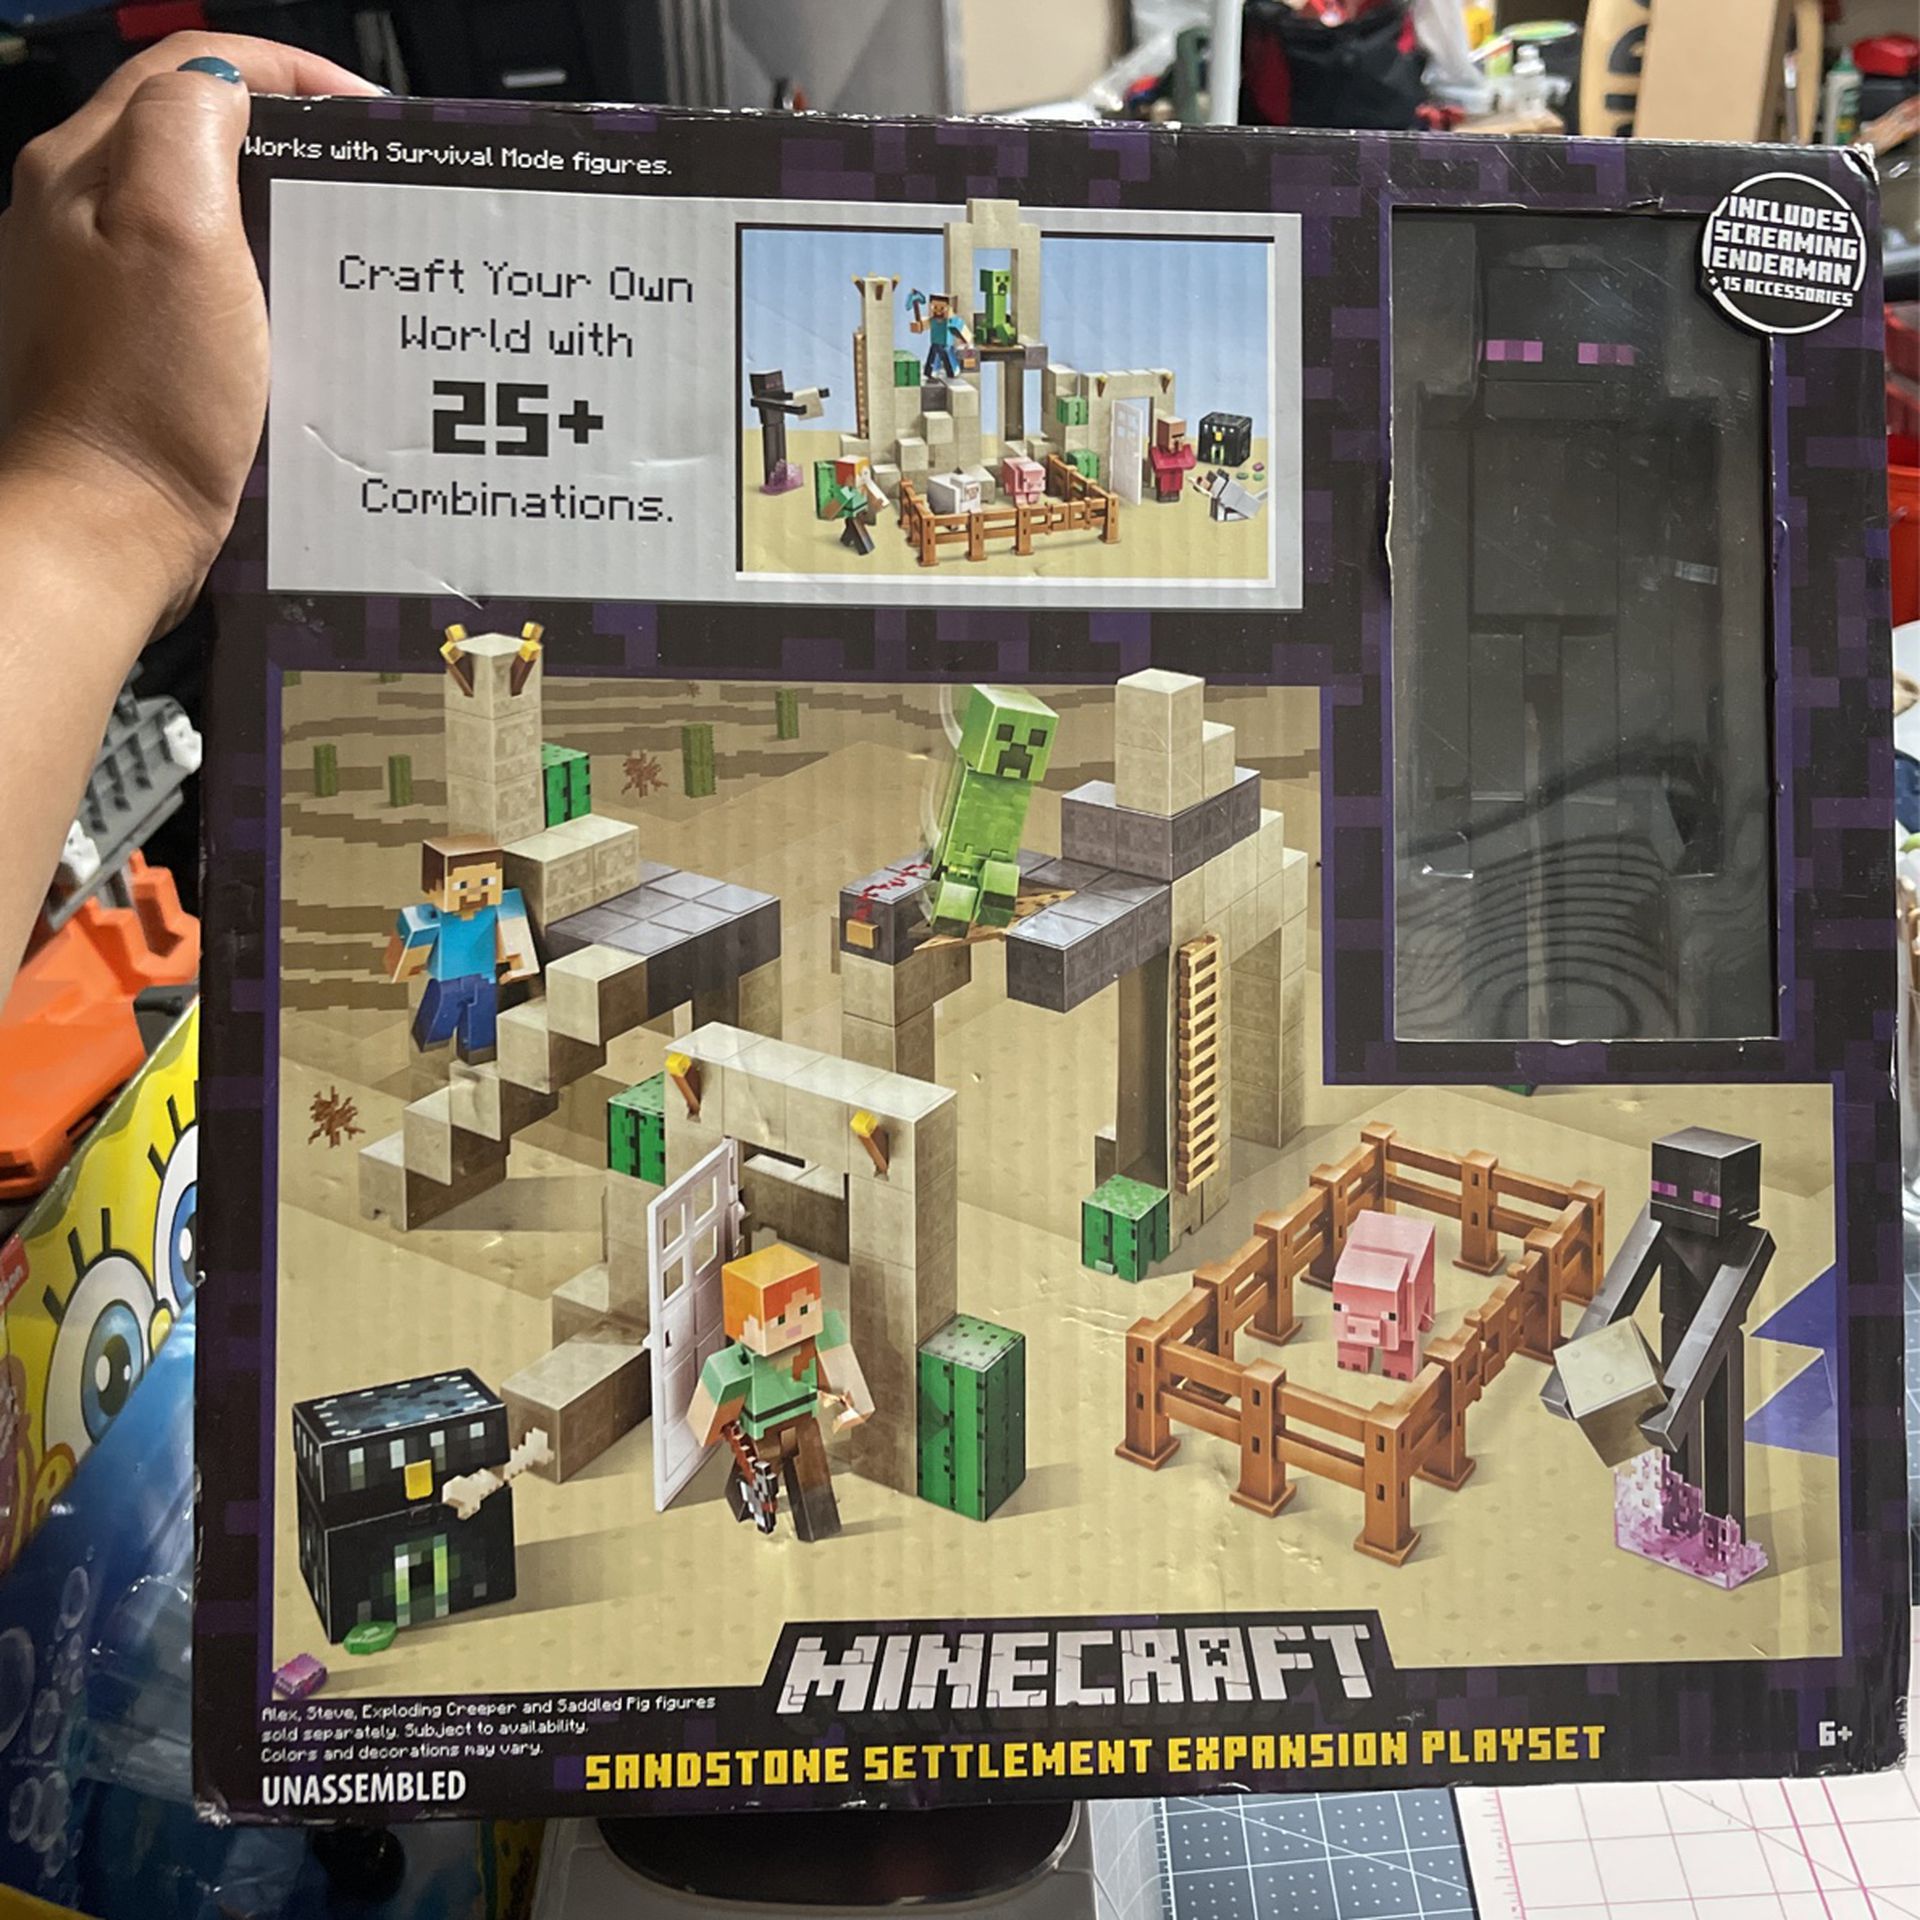 Minecraft Playset More Than 25 Combinations Super Rare. Not For Sale Anymore. 